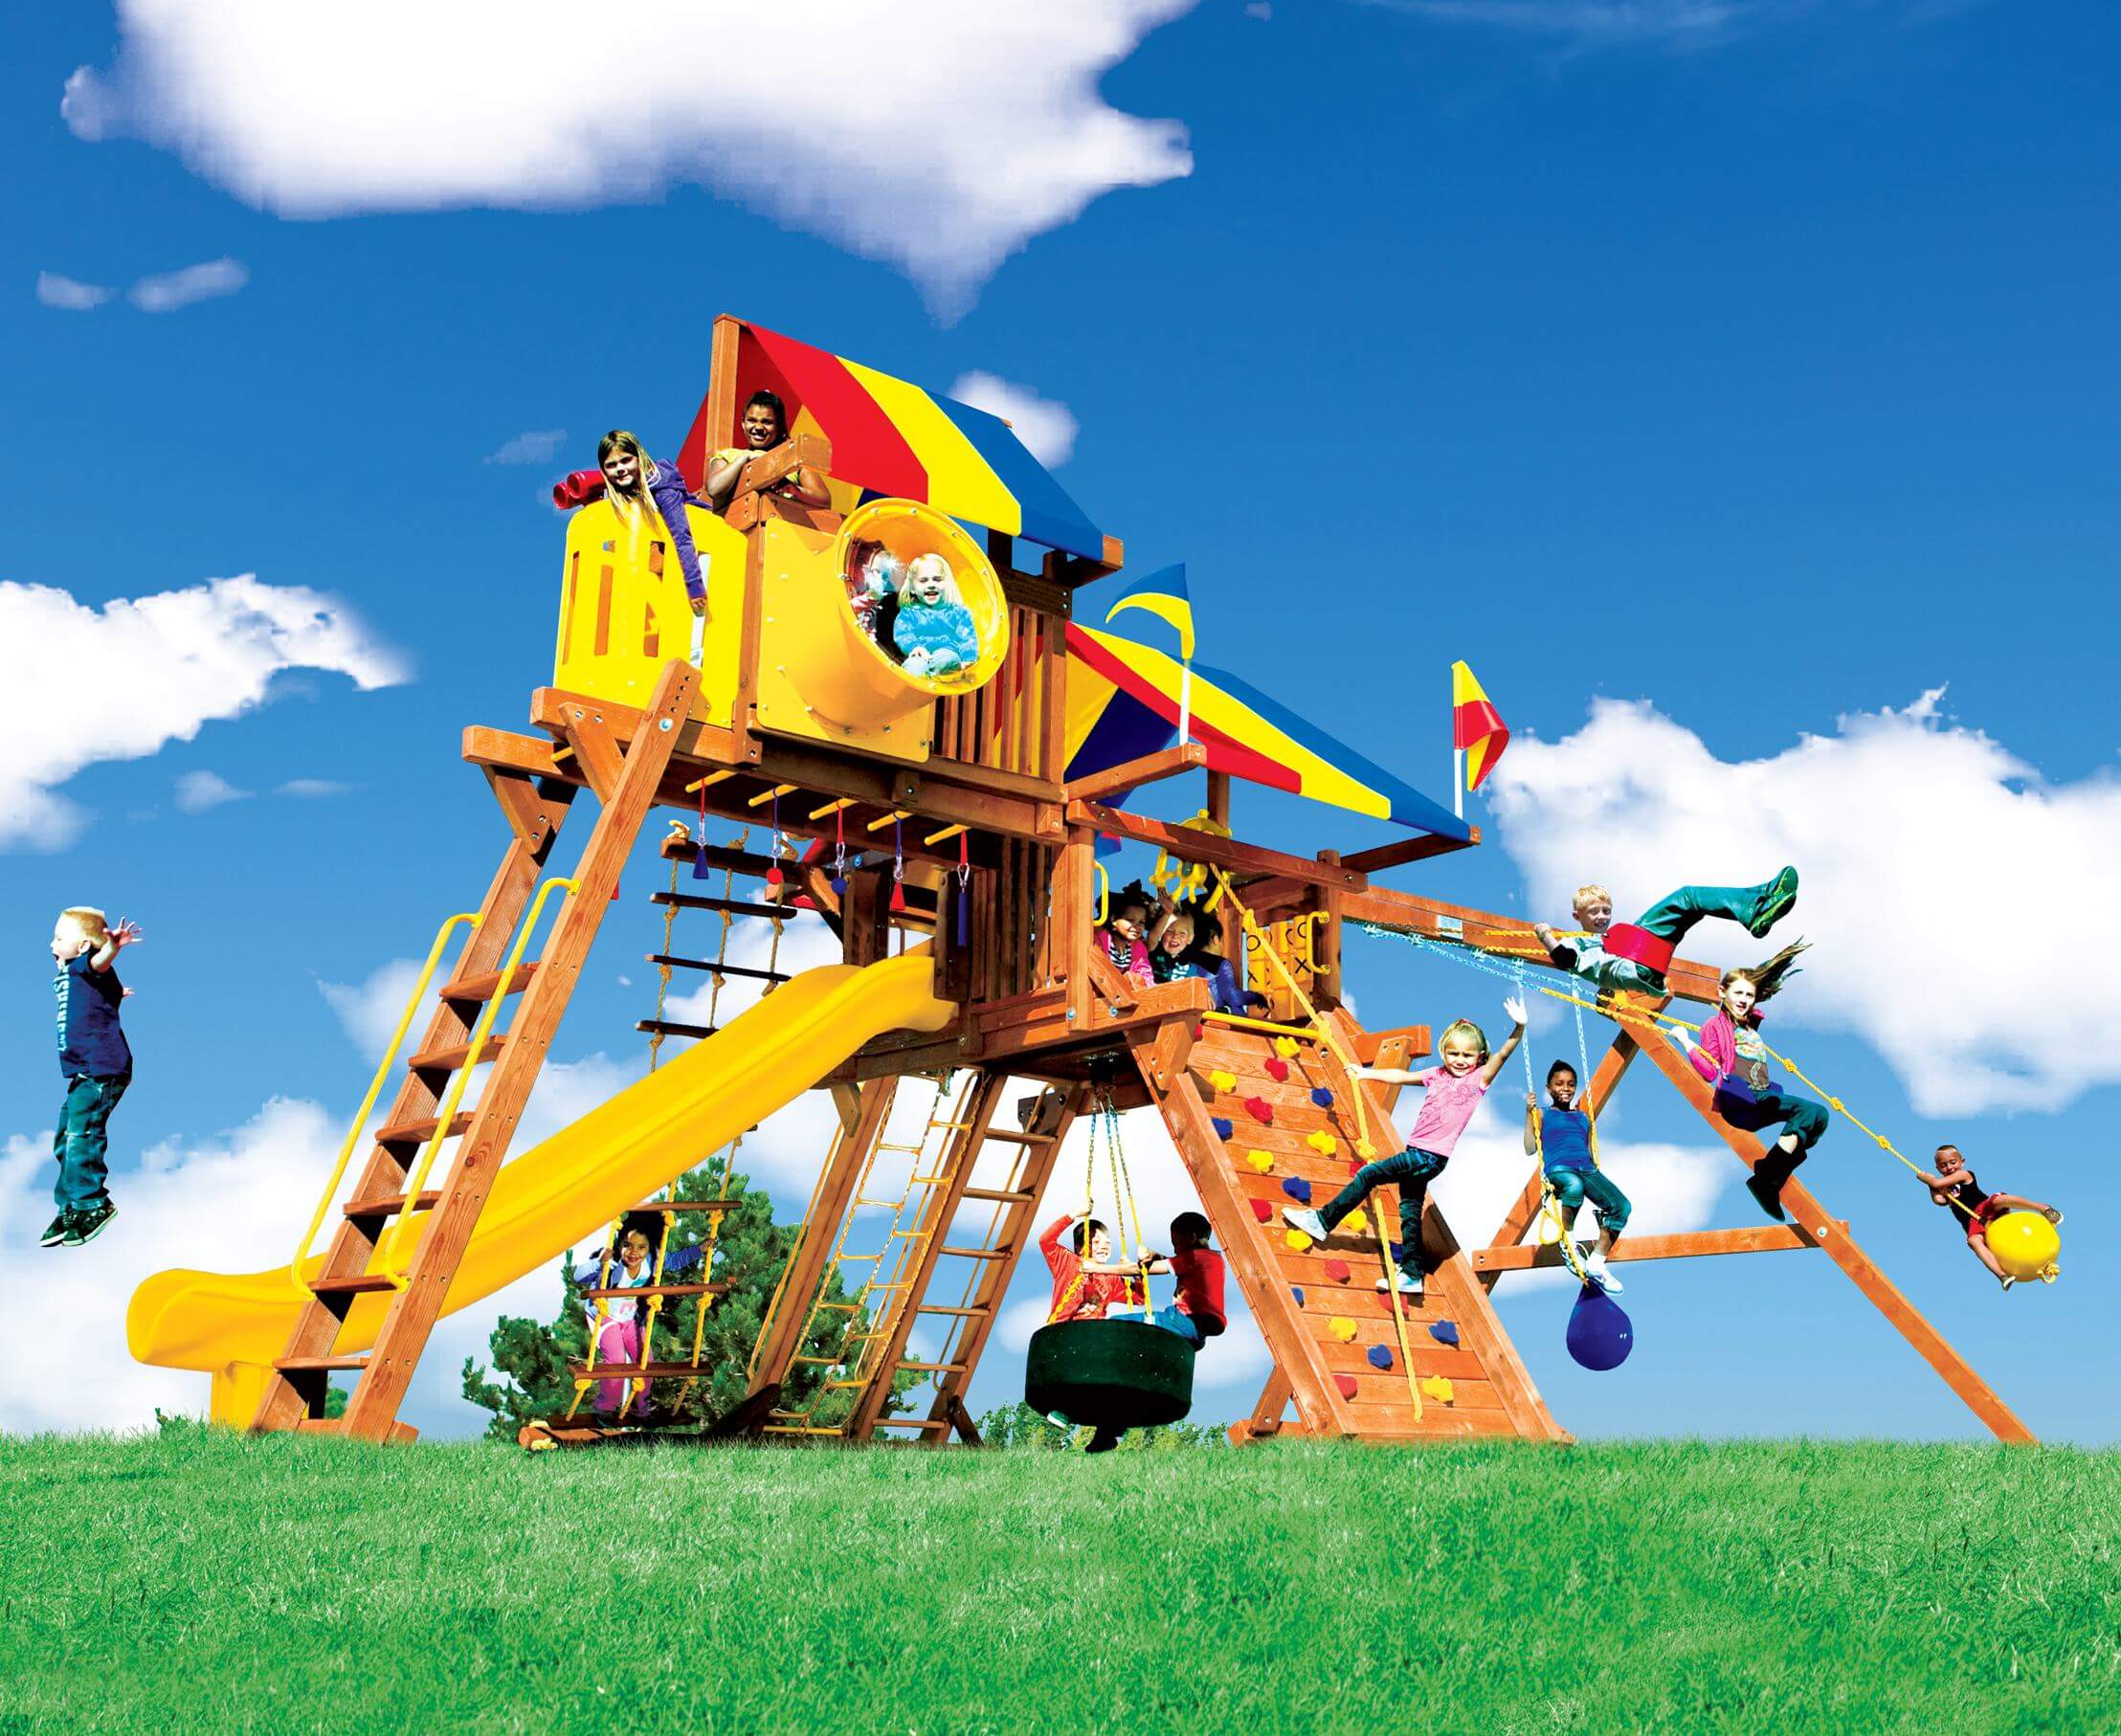 Rainbow Climber - Single Arched Ladder for Kids' Playground